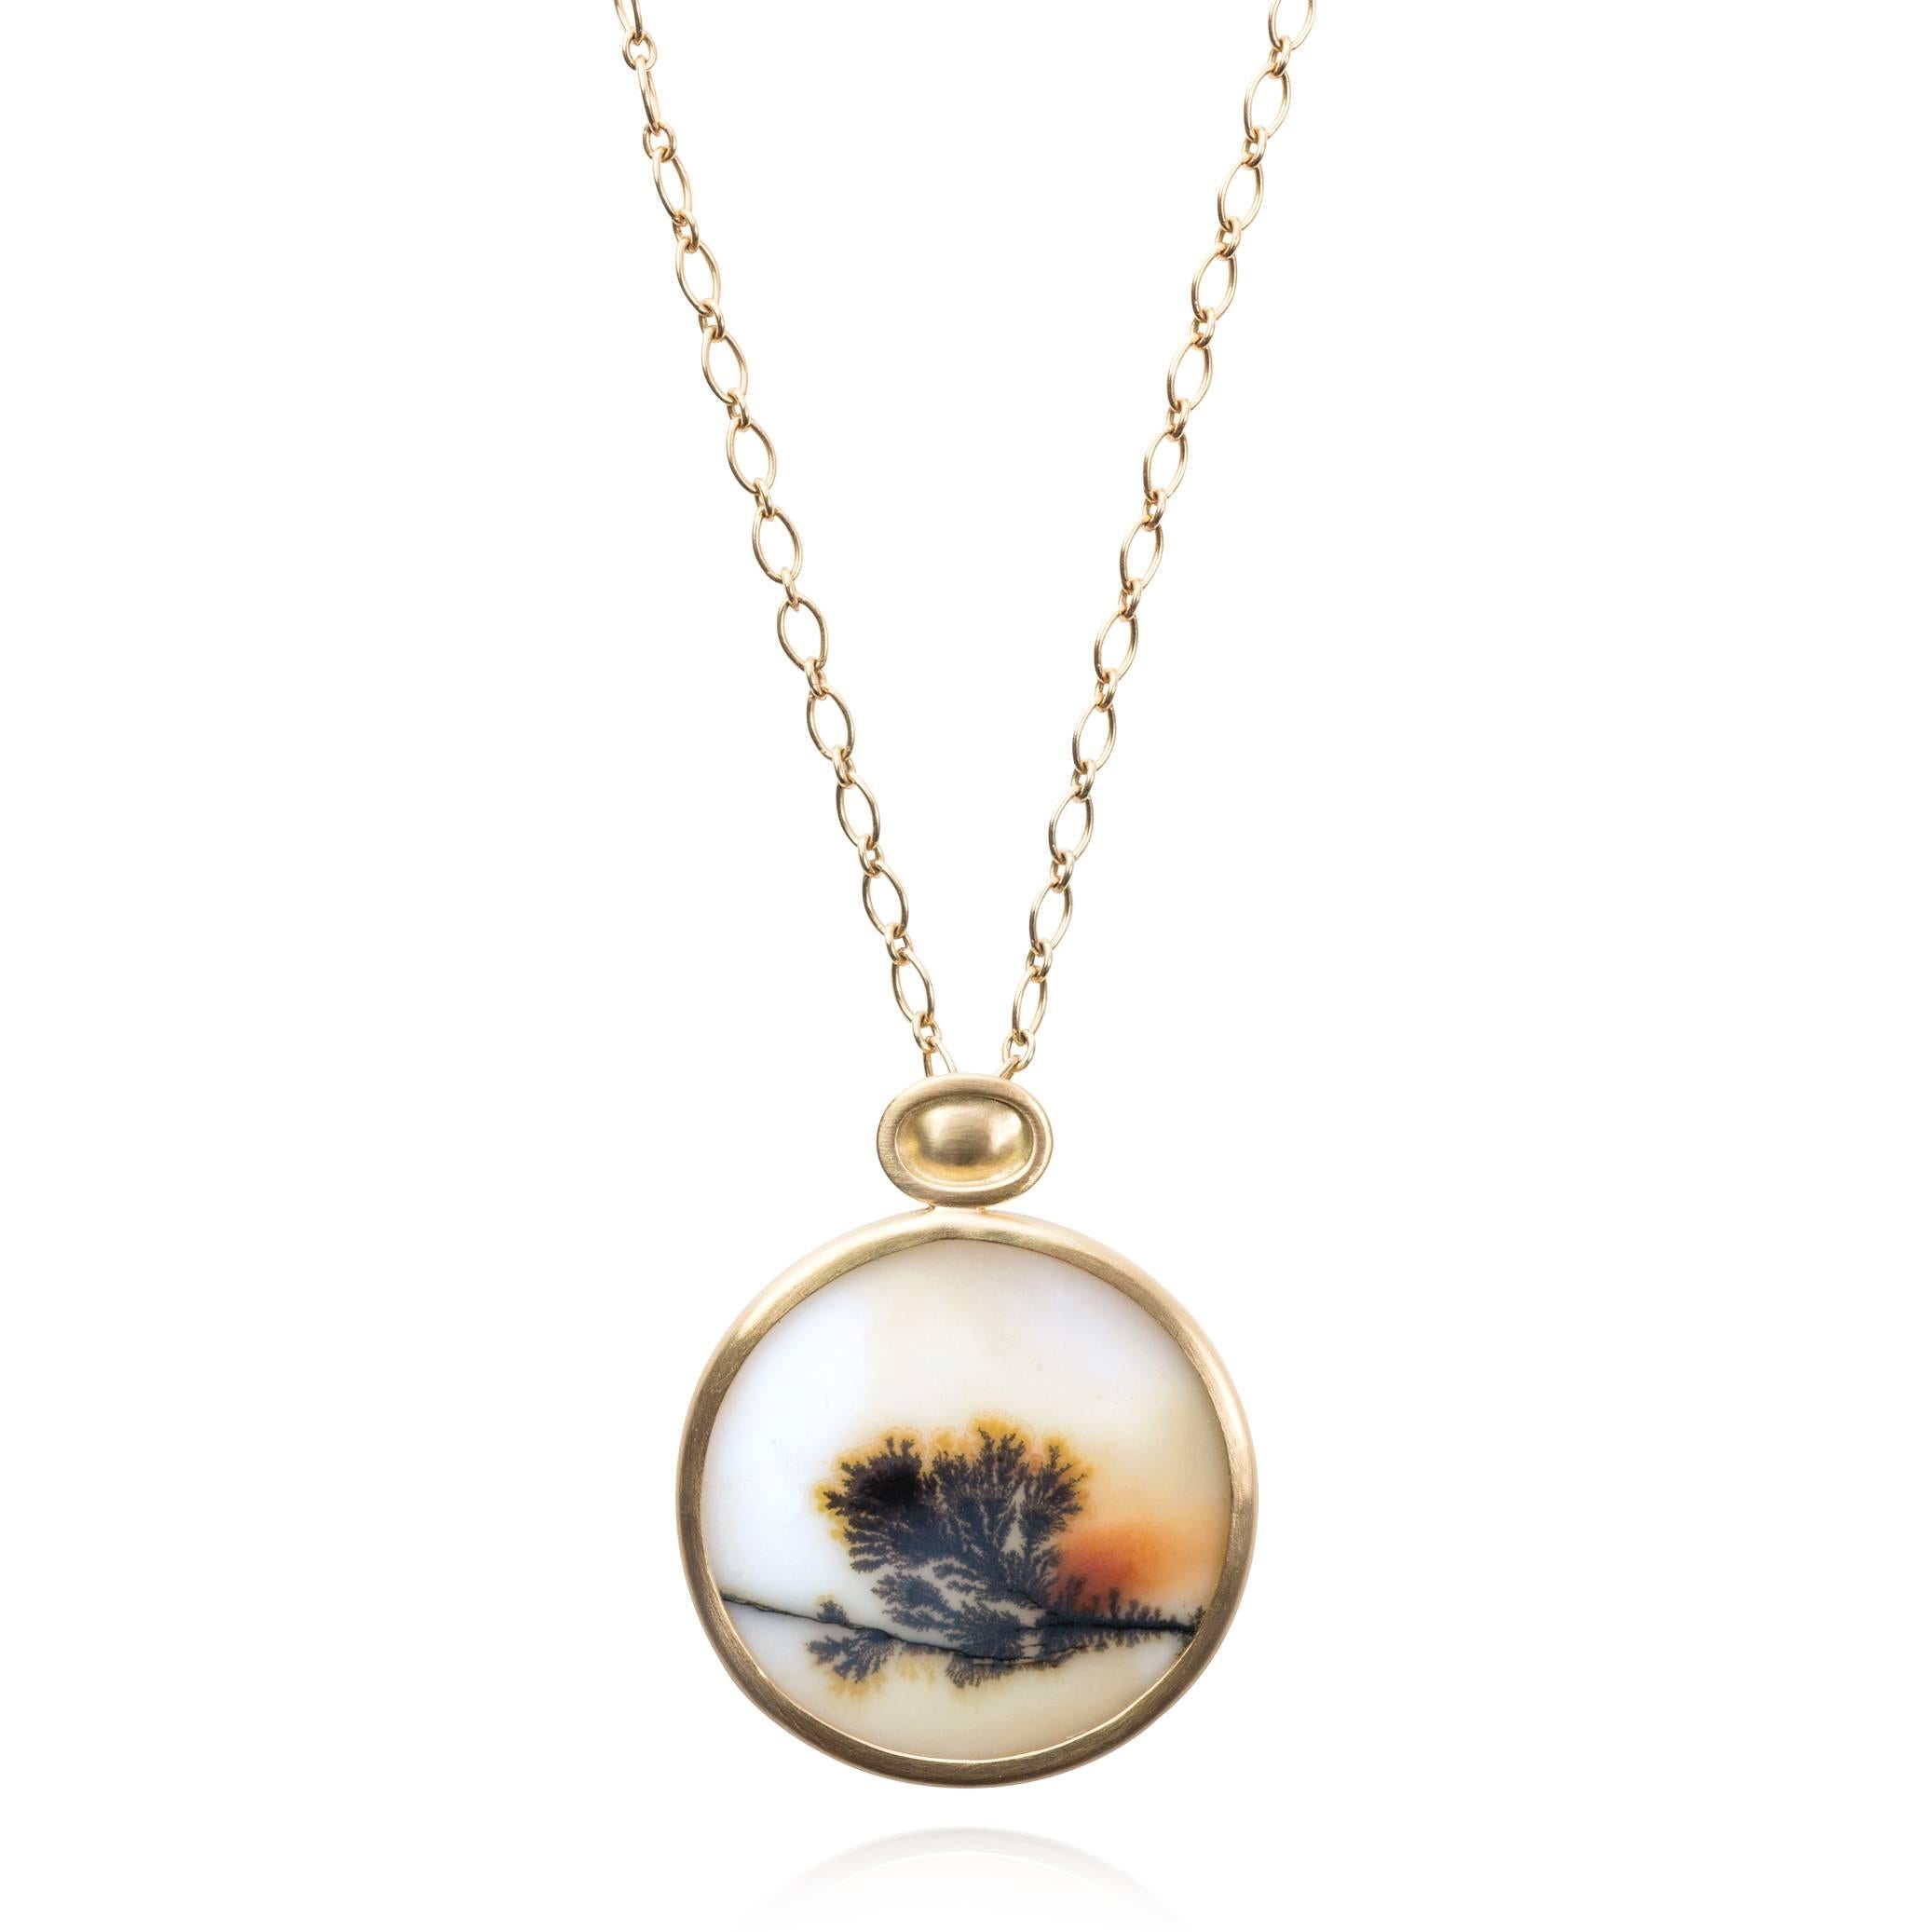 One of a Kind Bonzai Tree Sunset Necklace handcrafted by Monica Marcella in matte-finished 18k yellow gold featuring a spectacular natural white agate with black dendrite surrounded by soft orange and red accents. The gemstone depicts a beautiful